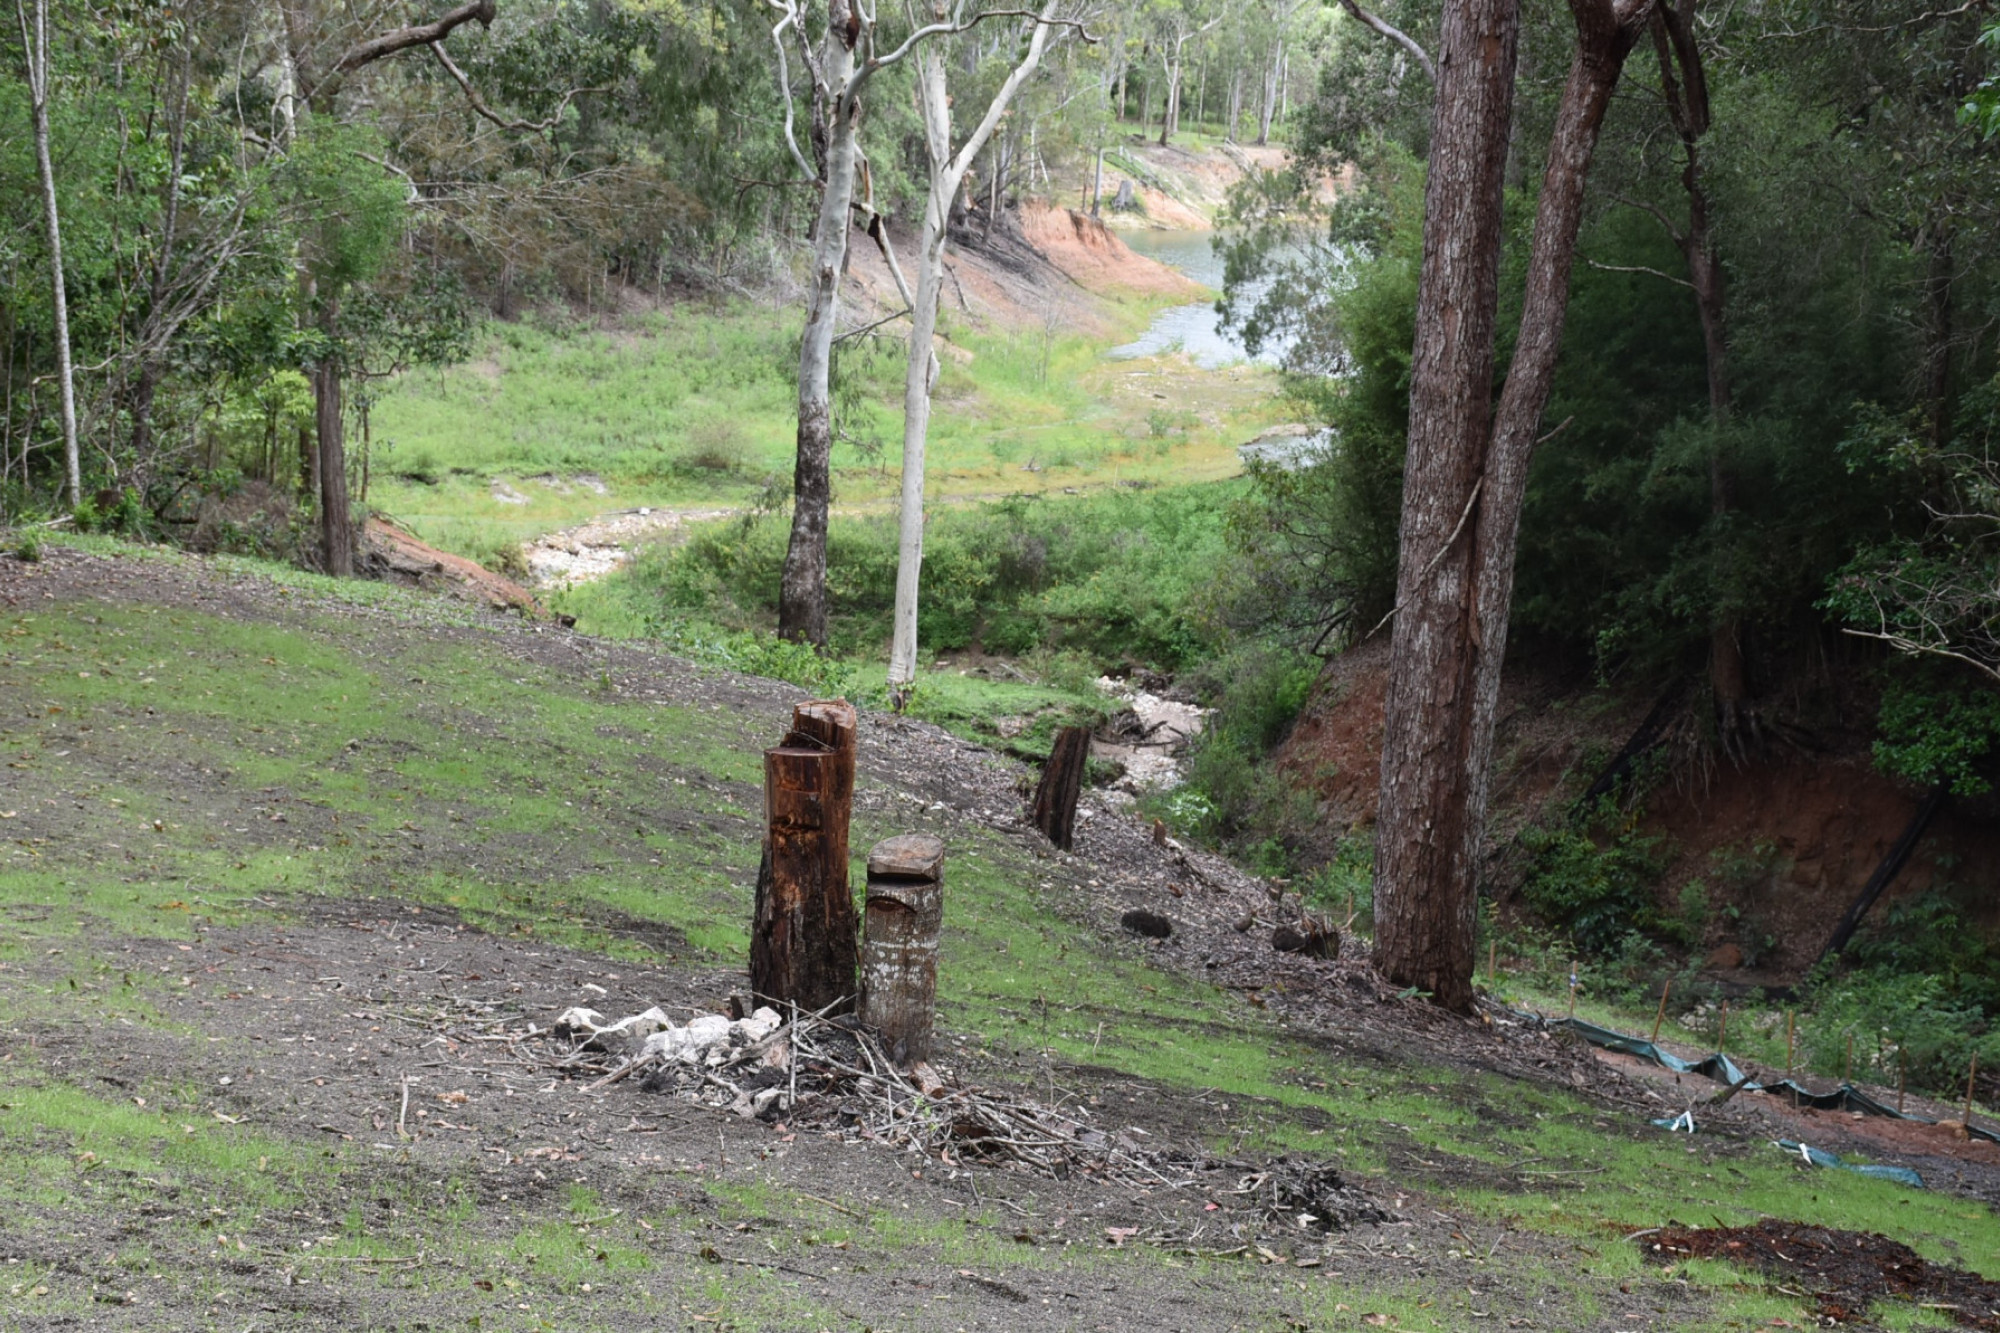 Some of the council land, that was allegedly cleared near Lake Tinaroo.